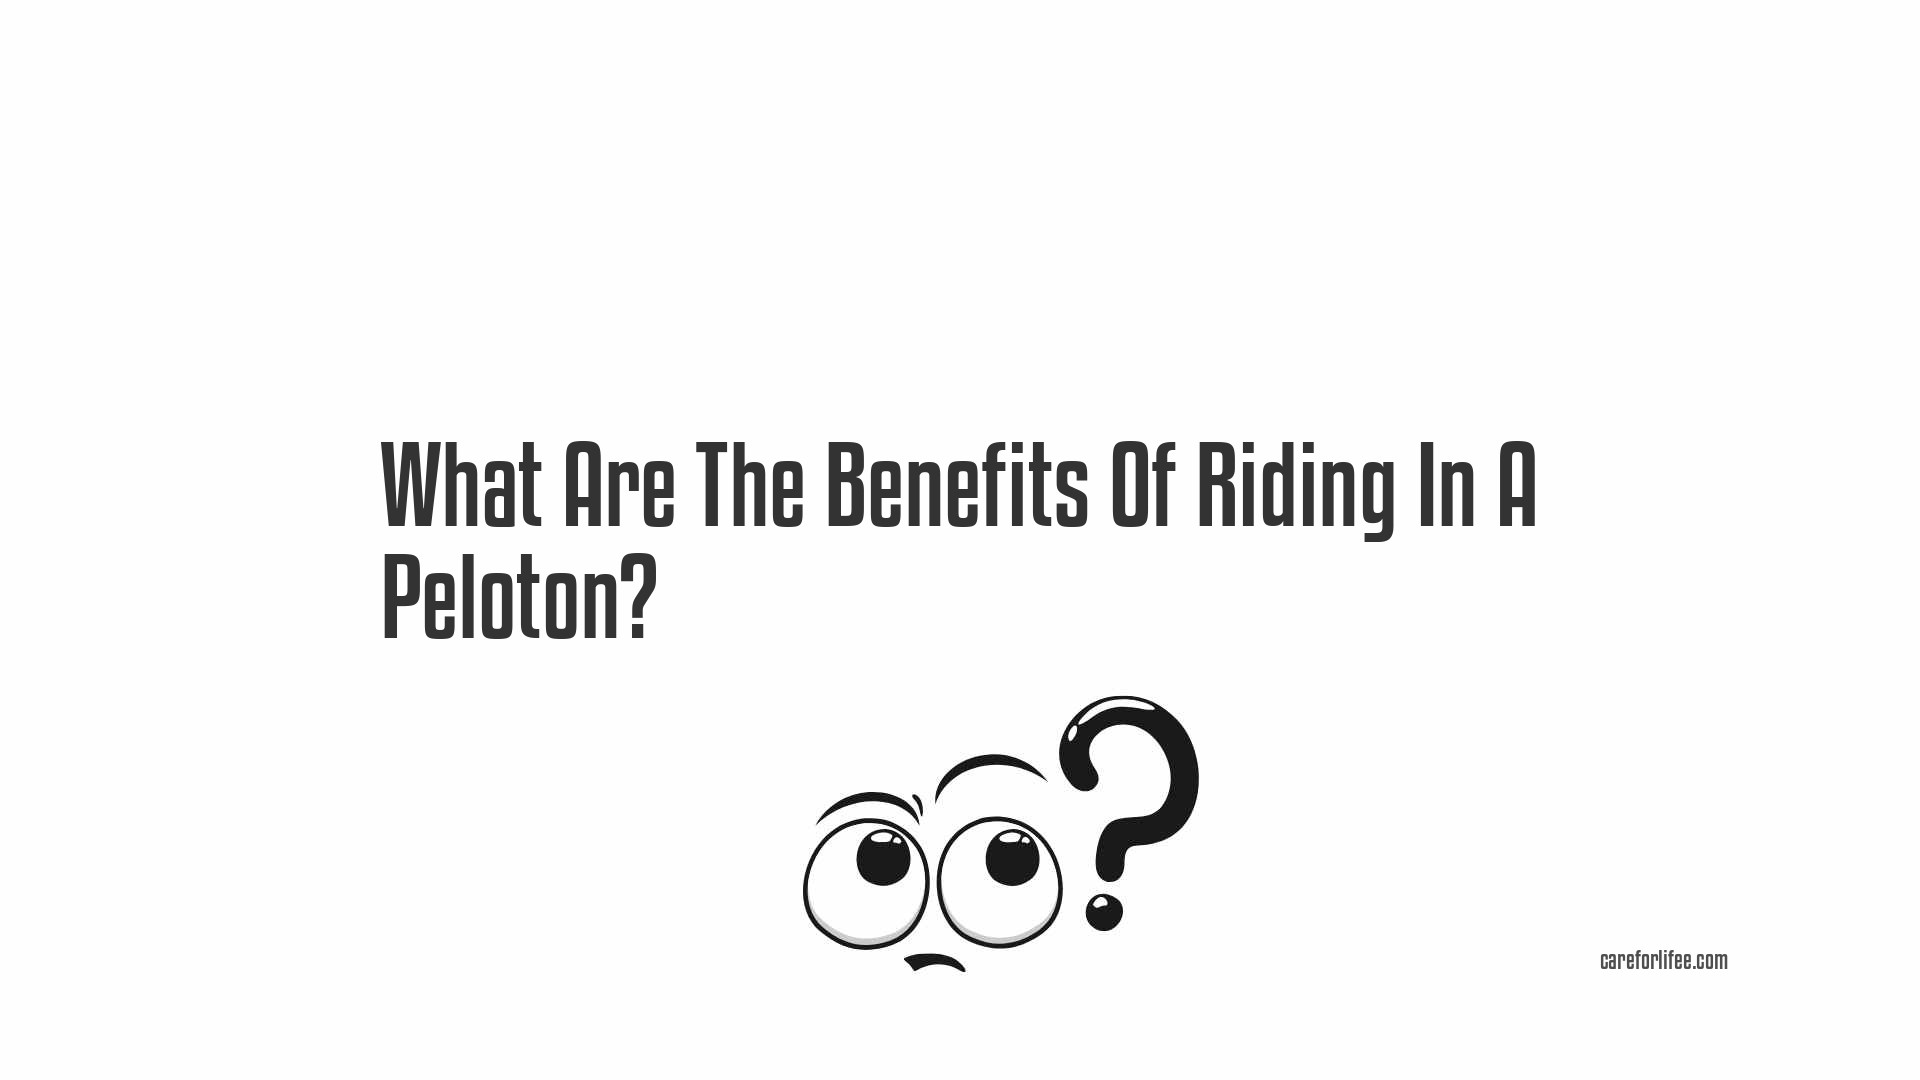 What Are The Benefits Of Riding In A Peloton?